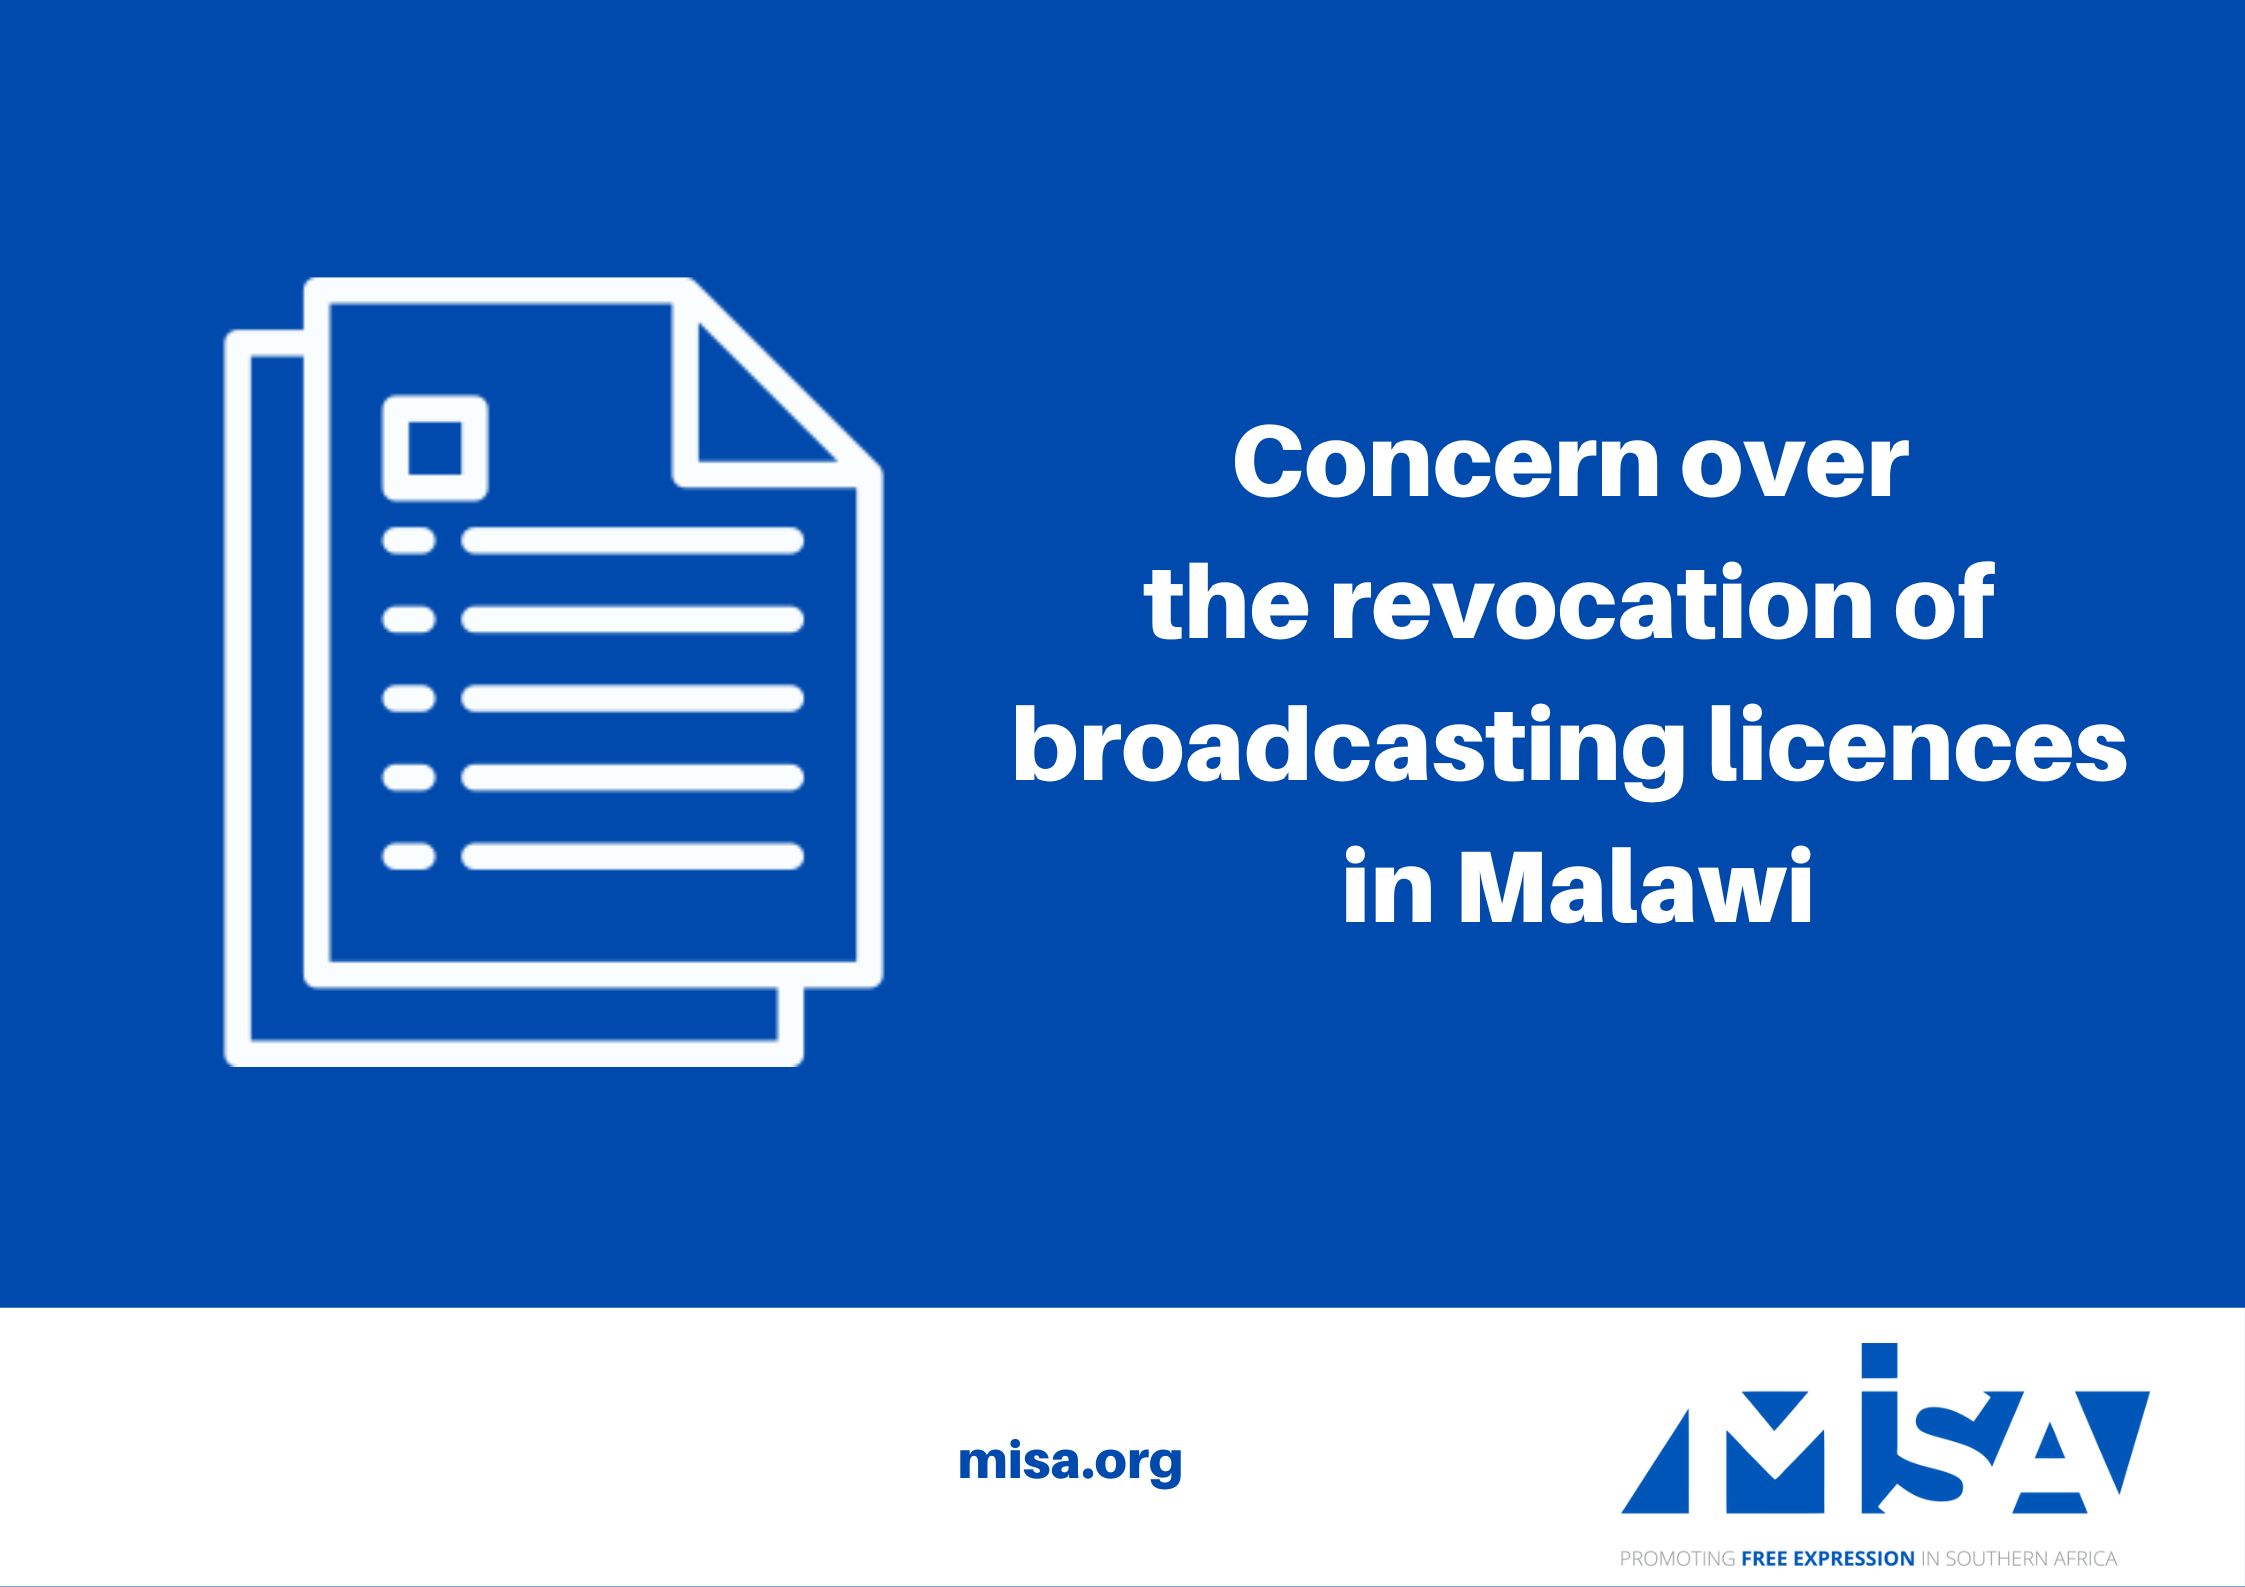 Concern over the revocation of broadcasting licences in Malawi